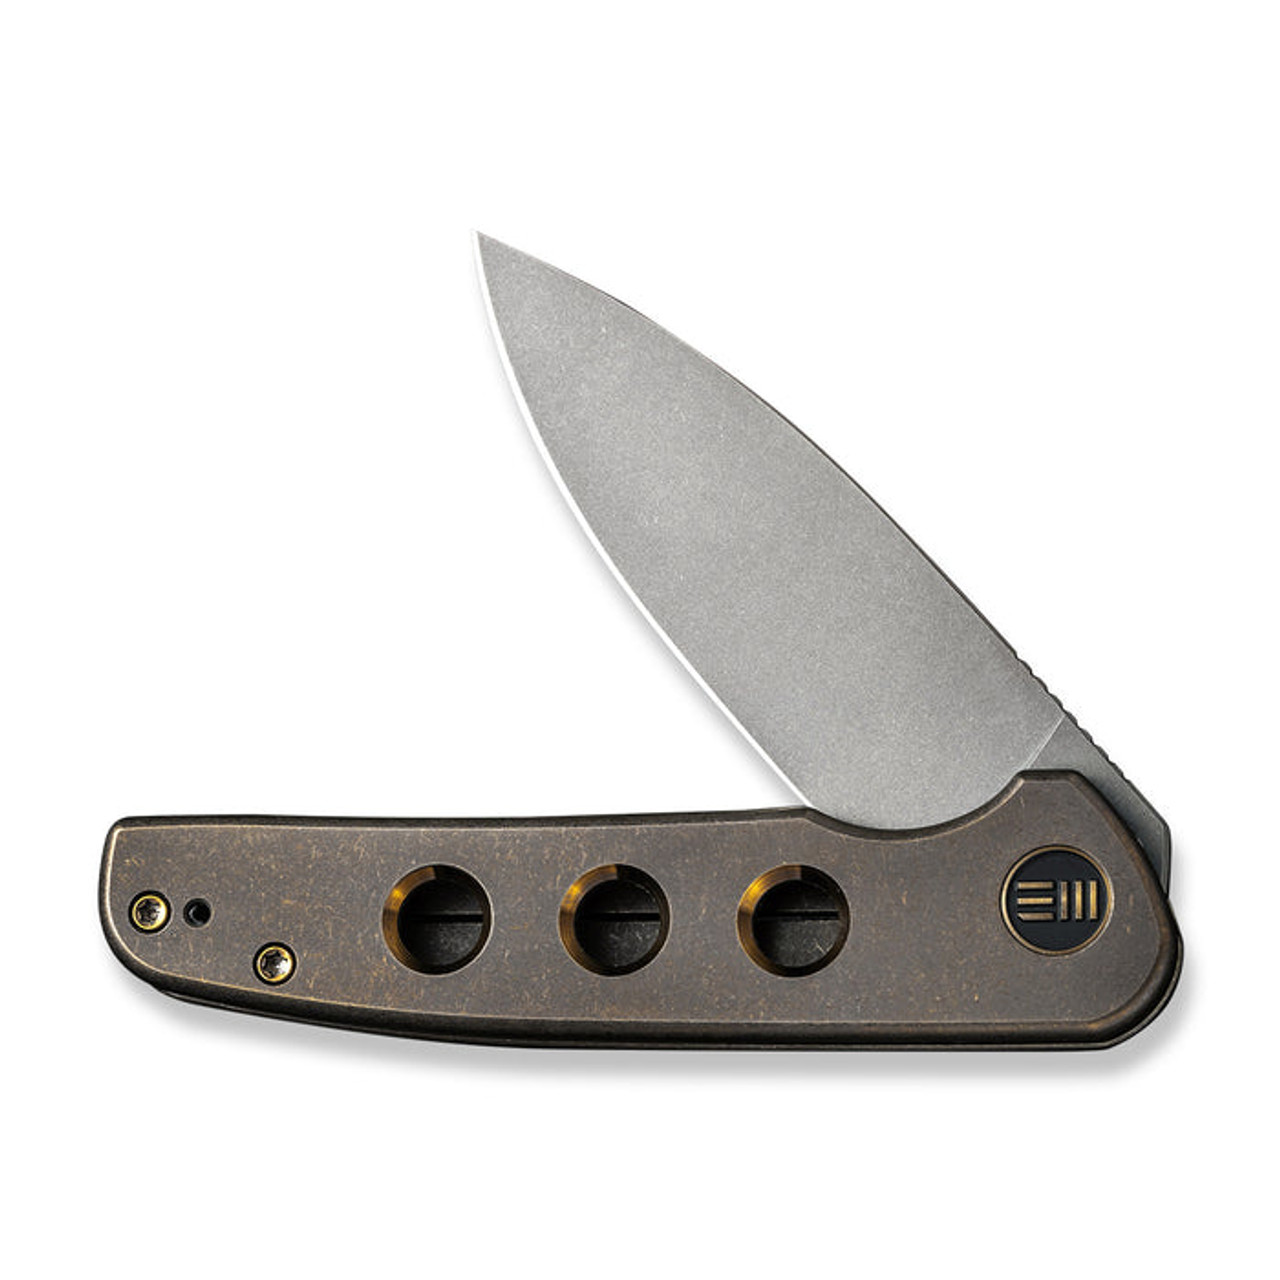 We Knife Shakan Flipper Knife (WE20052B-2) 2.97" CPM-20CV Gray Stonewashed Drop Point Plain Blade,  Bronze and Golden Titanium Handle With Holes